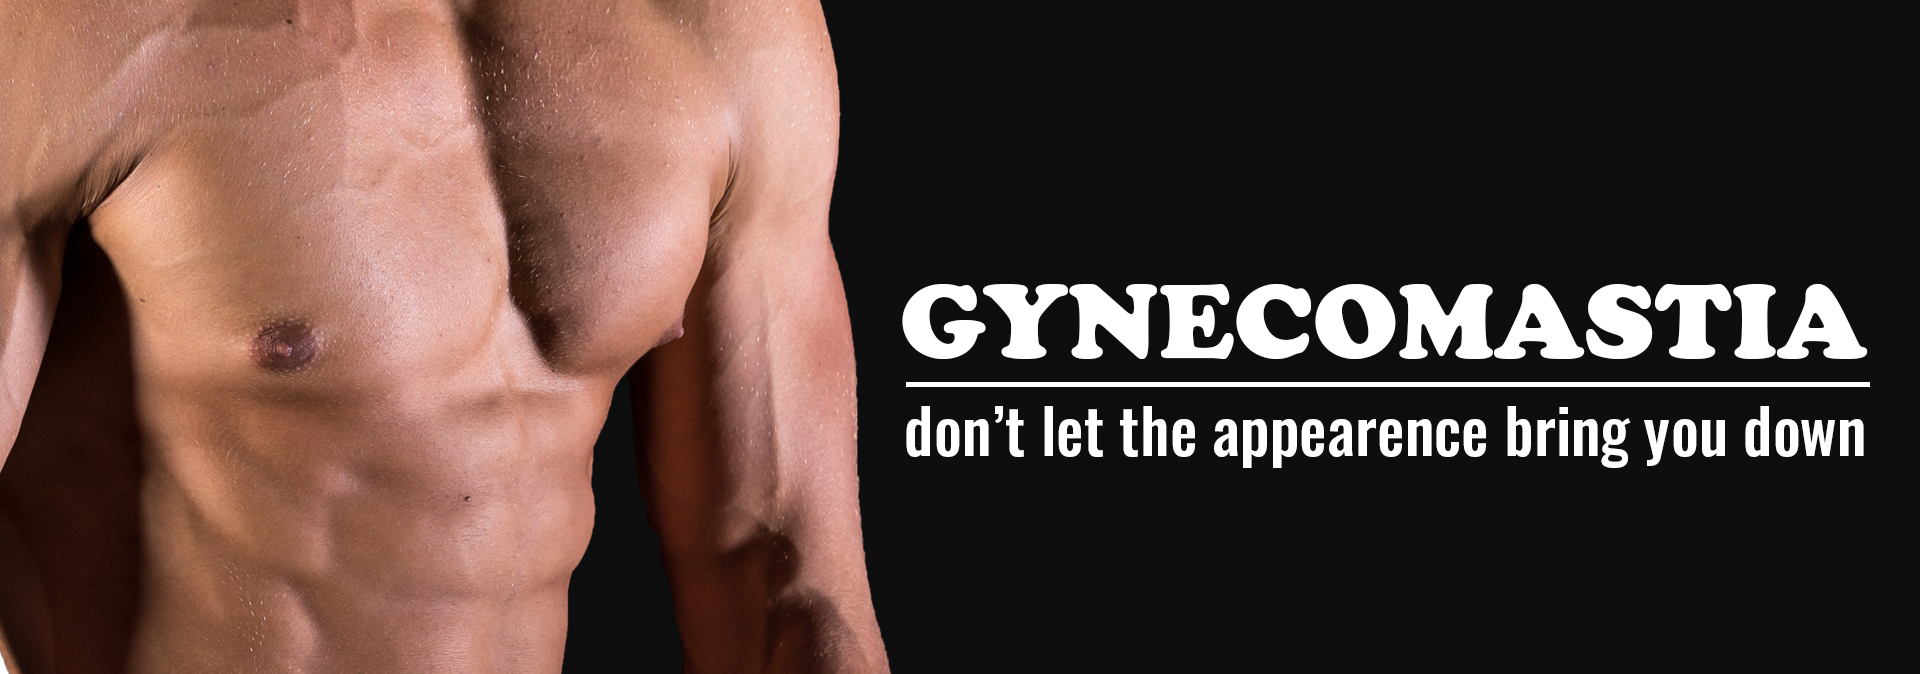 Gynecomastia - don’t let the condition bring you down